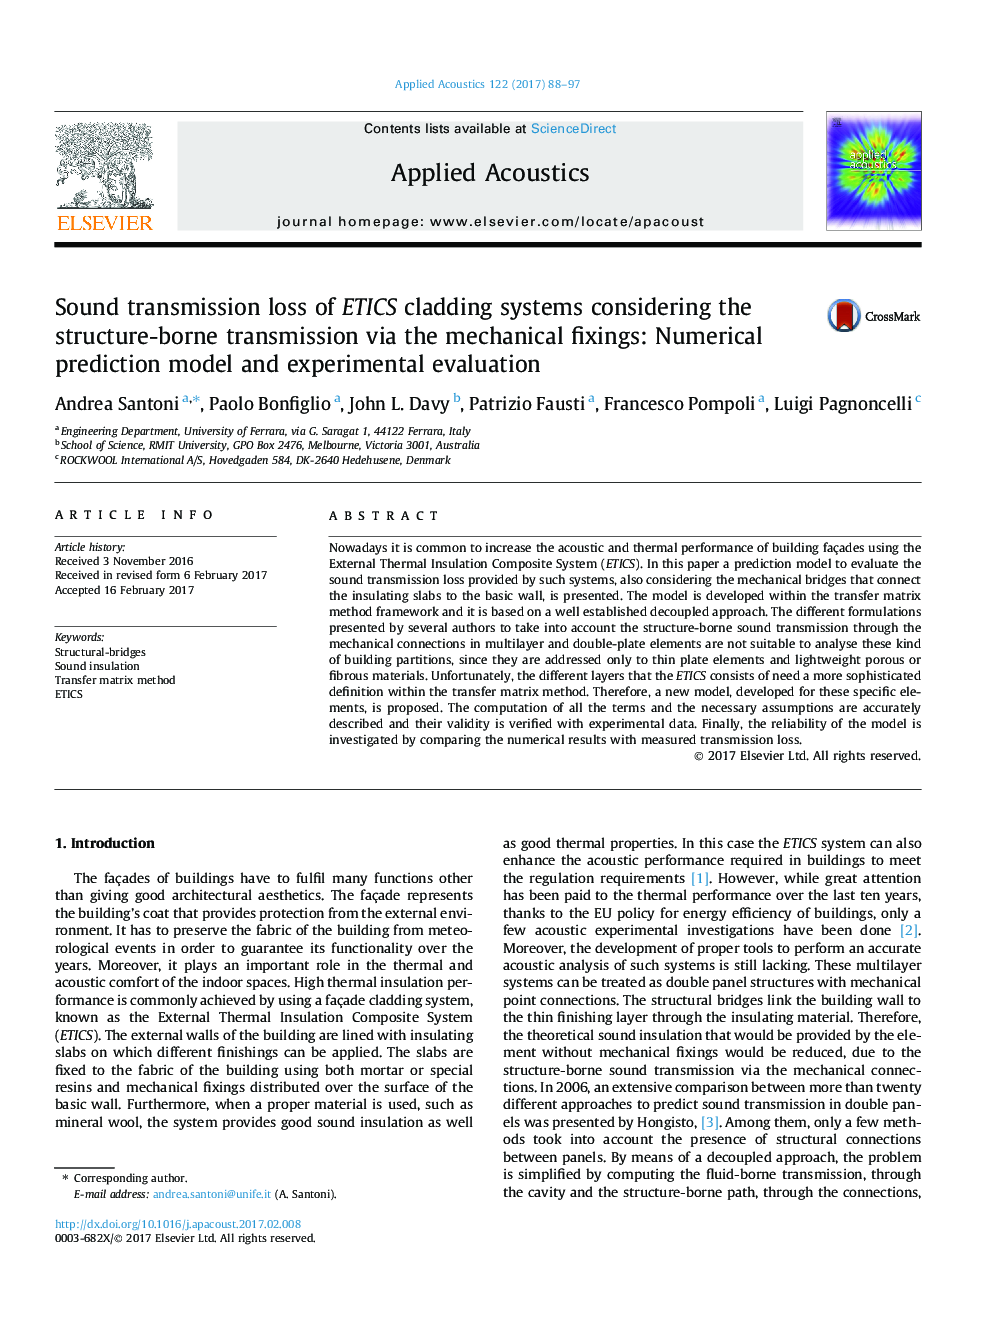 Sound transmission loss of ETICS cladding systems considering the structure-borne transmission via the mechanical fixings: Numerical prediction model and experimental evaluation